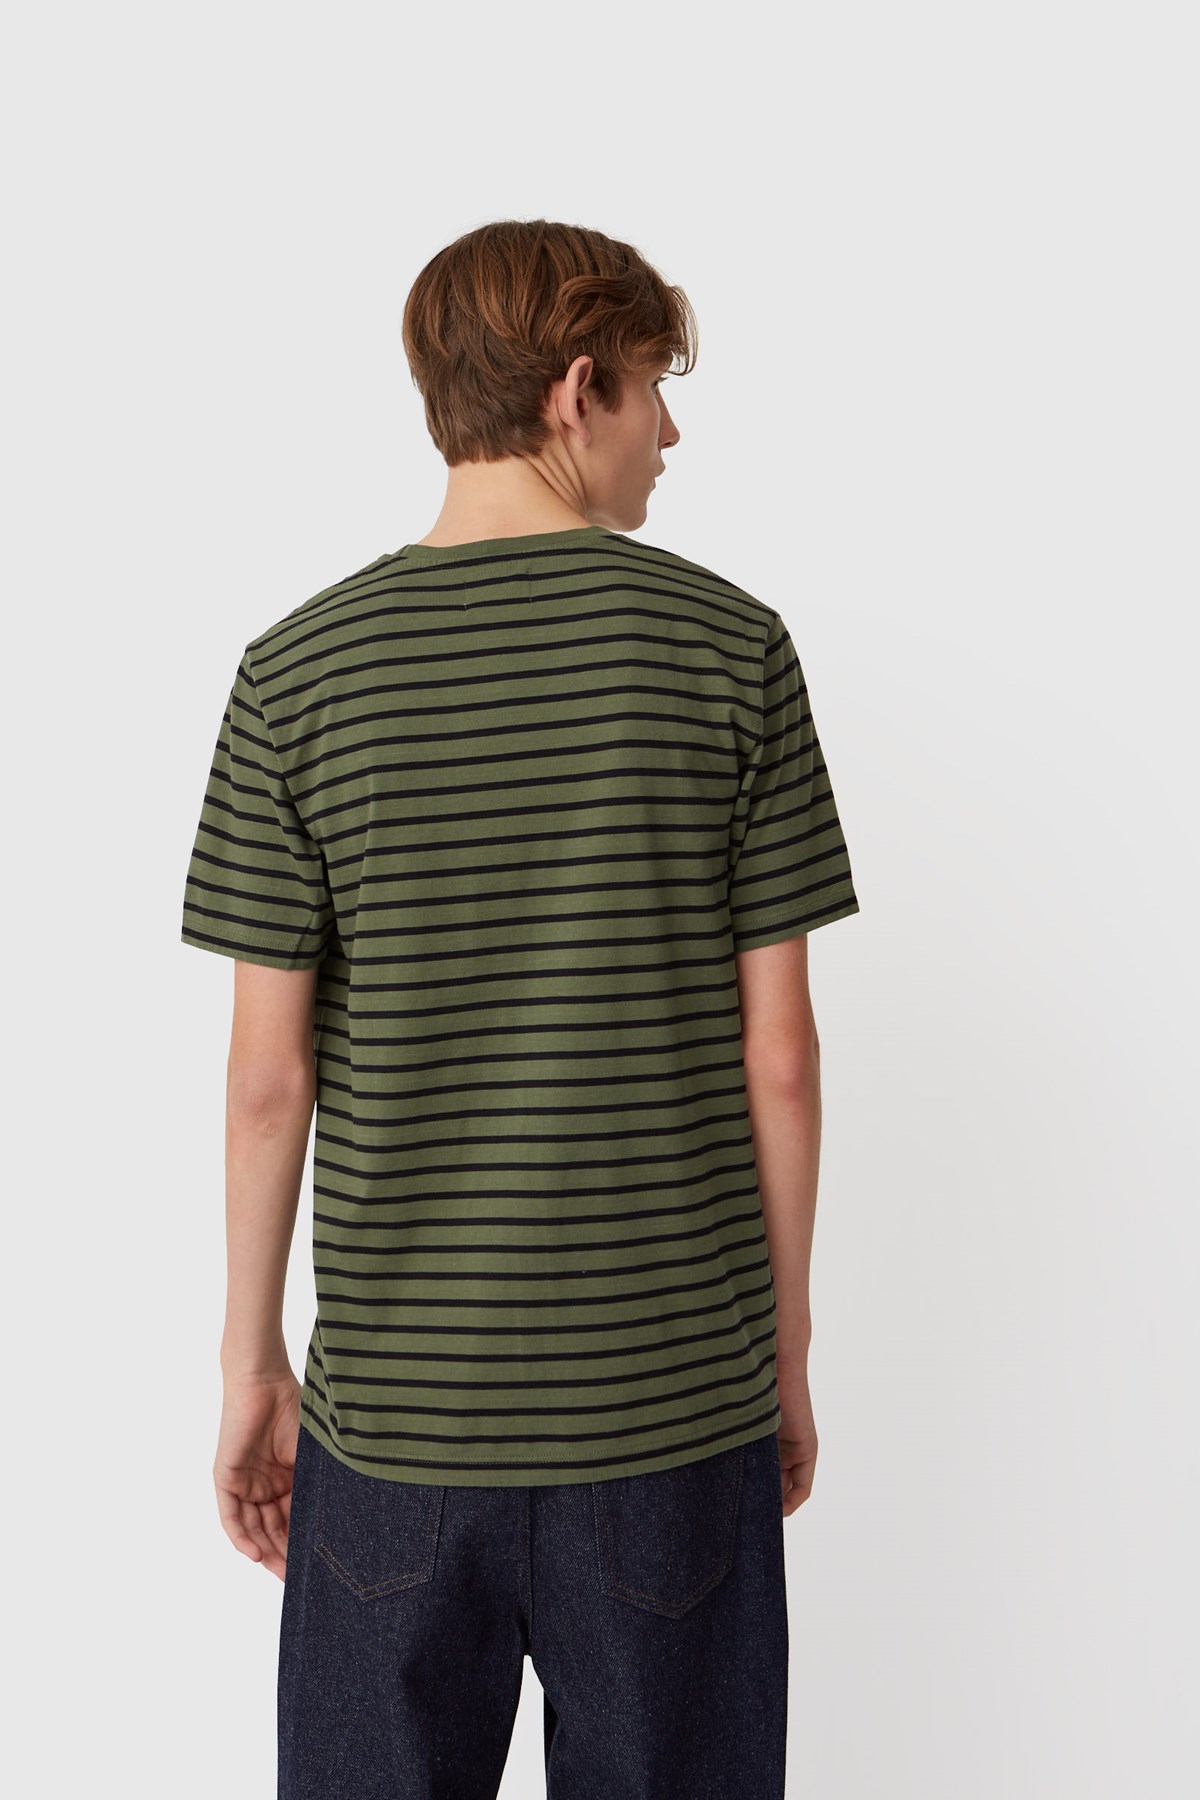 Double A by Wood Wood Ace T-shirt Army/black stripes | WoodWood.com